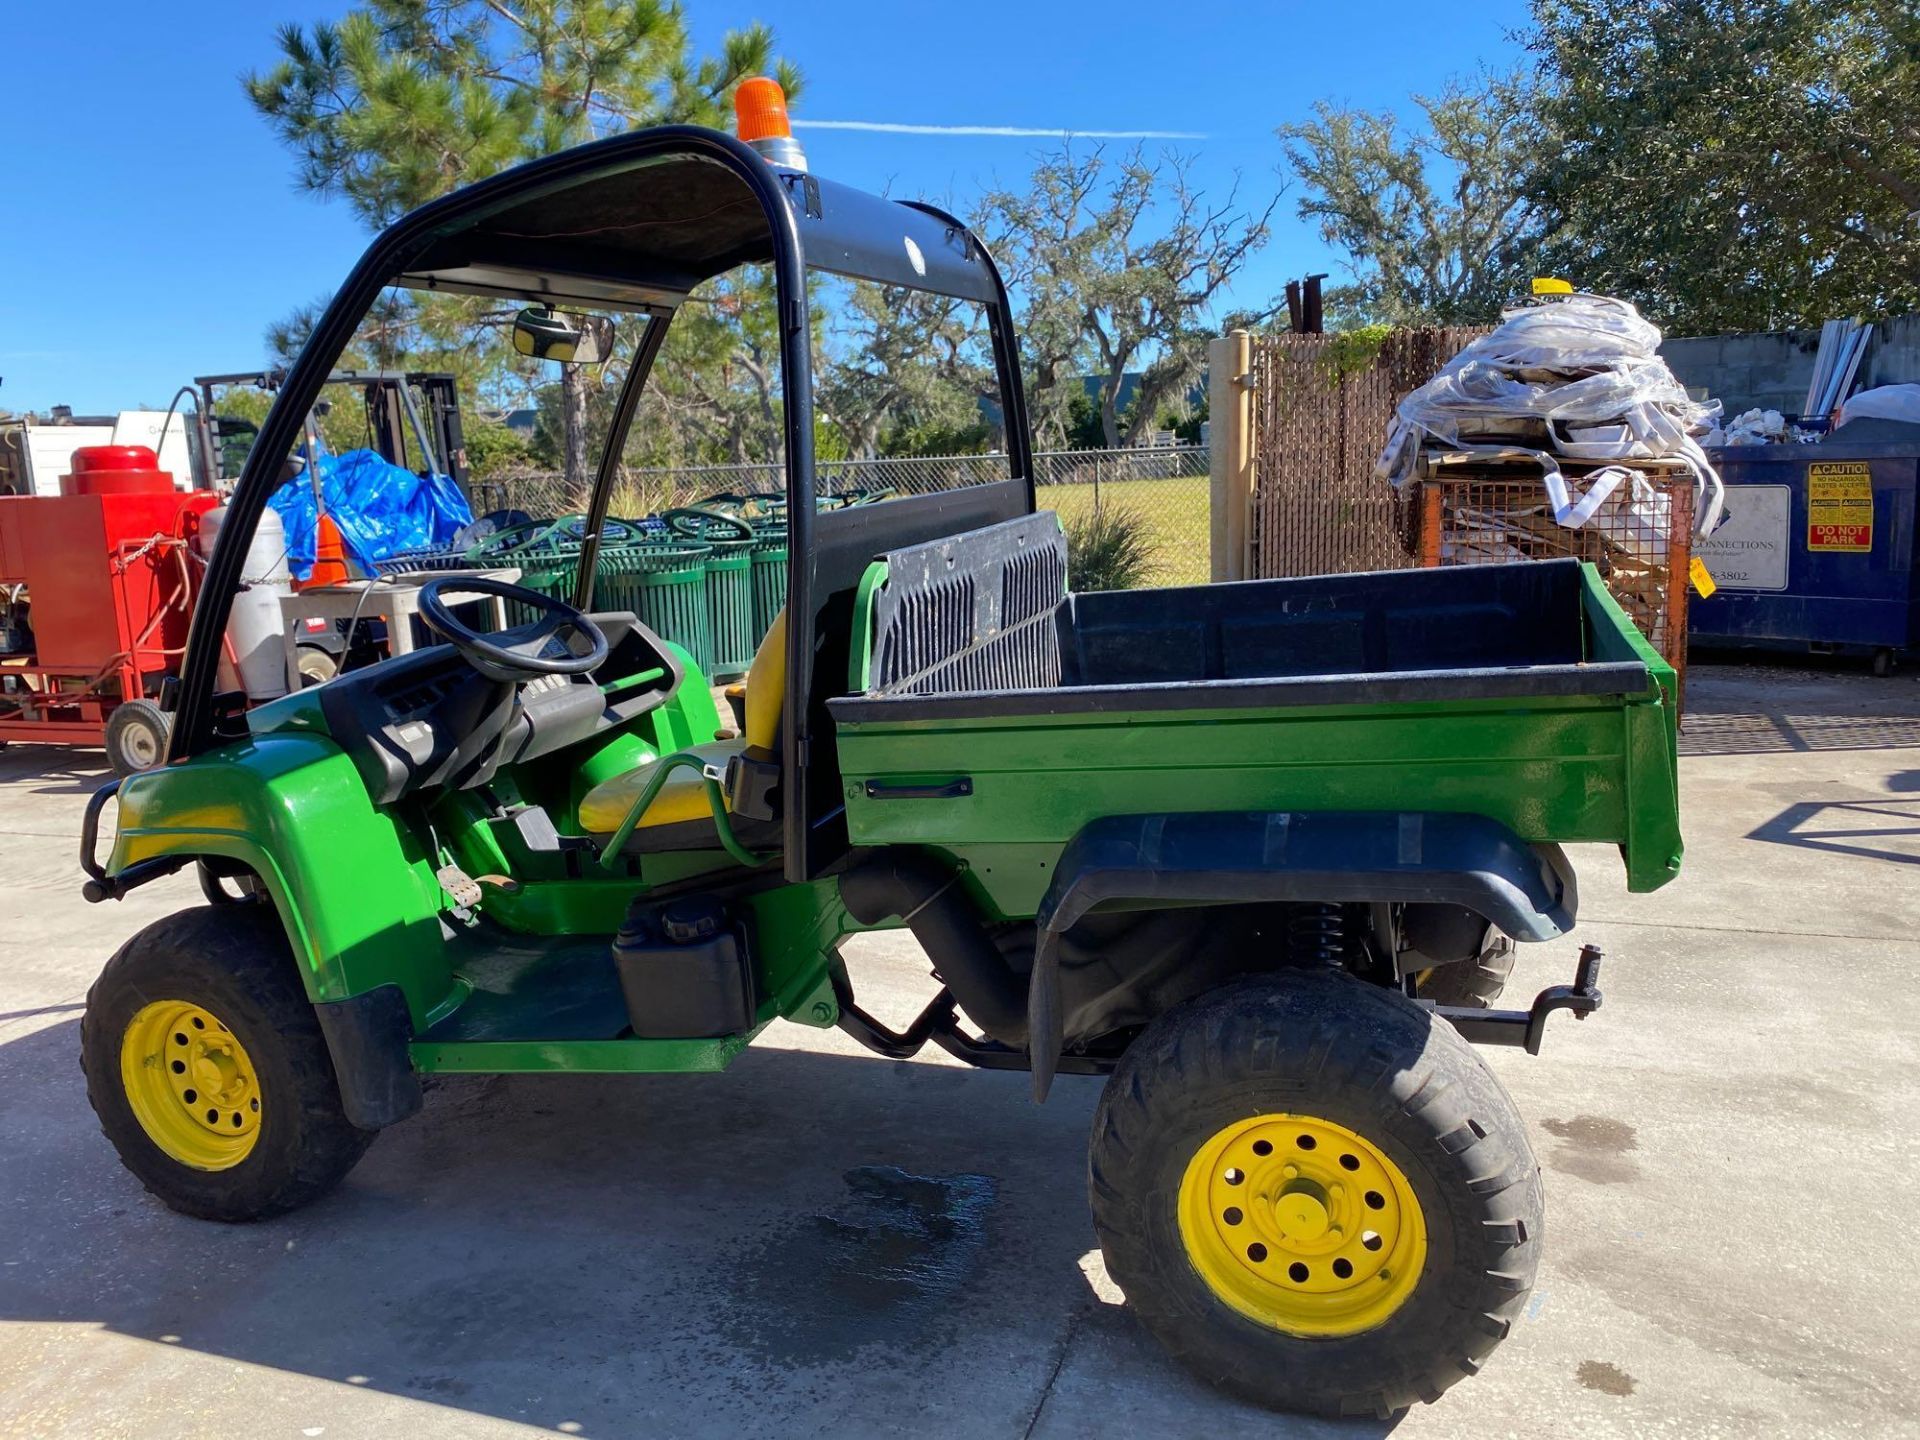 JOHN DEERE GATOR XUV ATV WITH DUMP BED, GAS POWERED, 1,713 HOURS SHOWING, RUNS AND DRIVES - Image 2 of 9